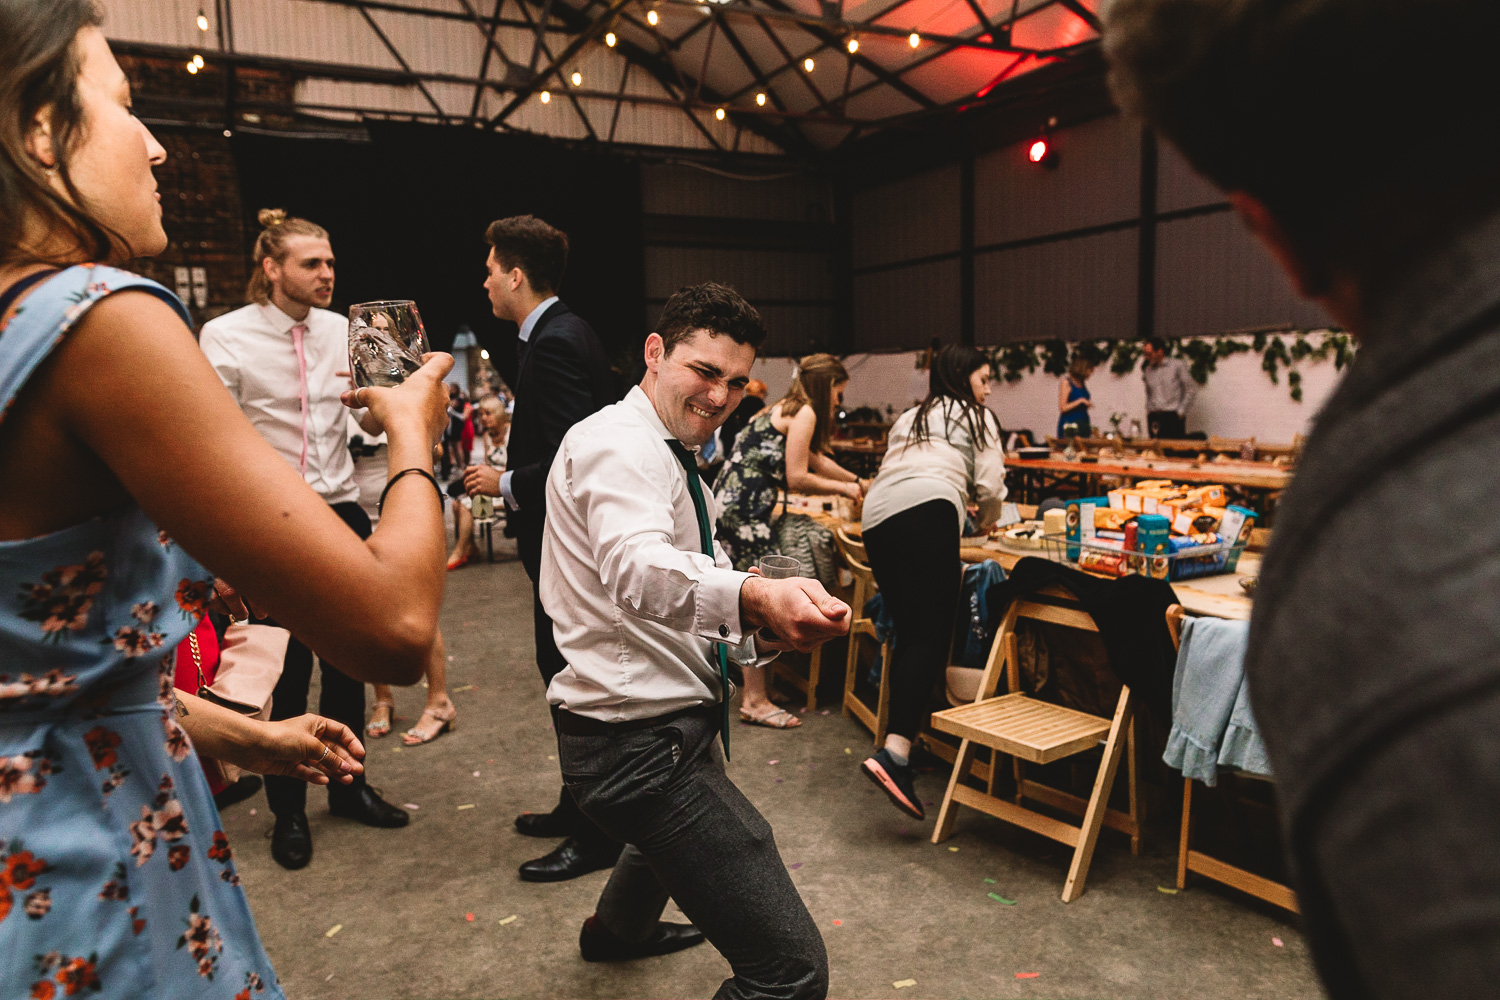 Guest dancing doing a pulling move to another guest on fun dance floor at alternative warehouse wedding venue 92 burton road